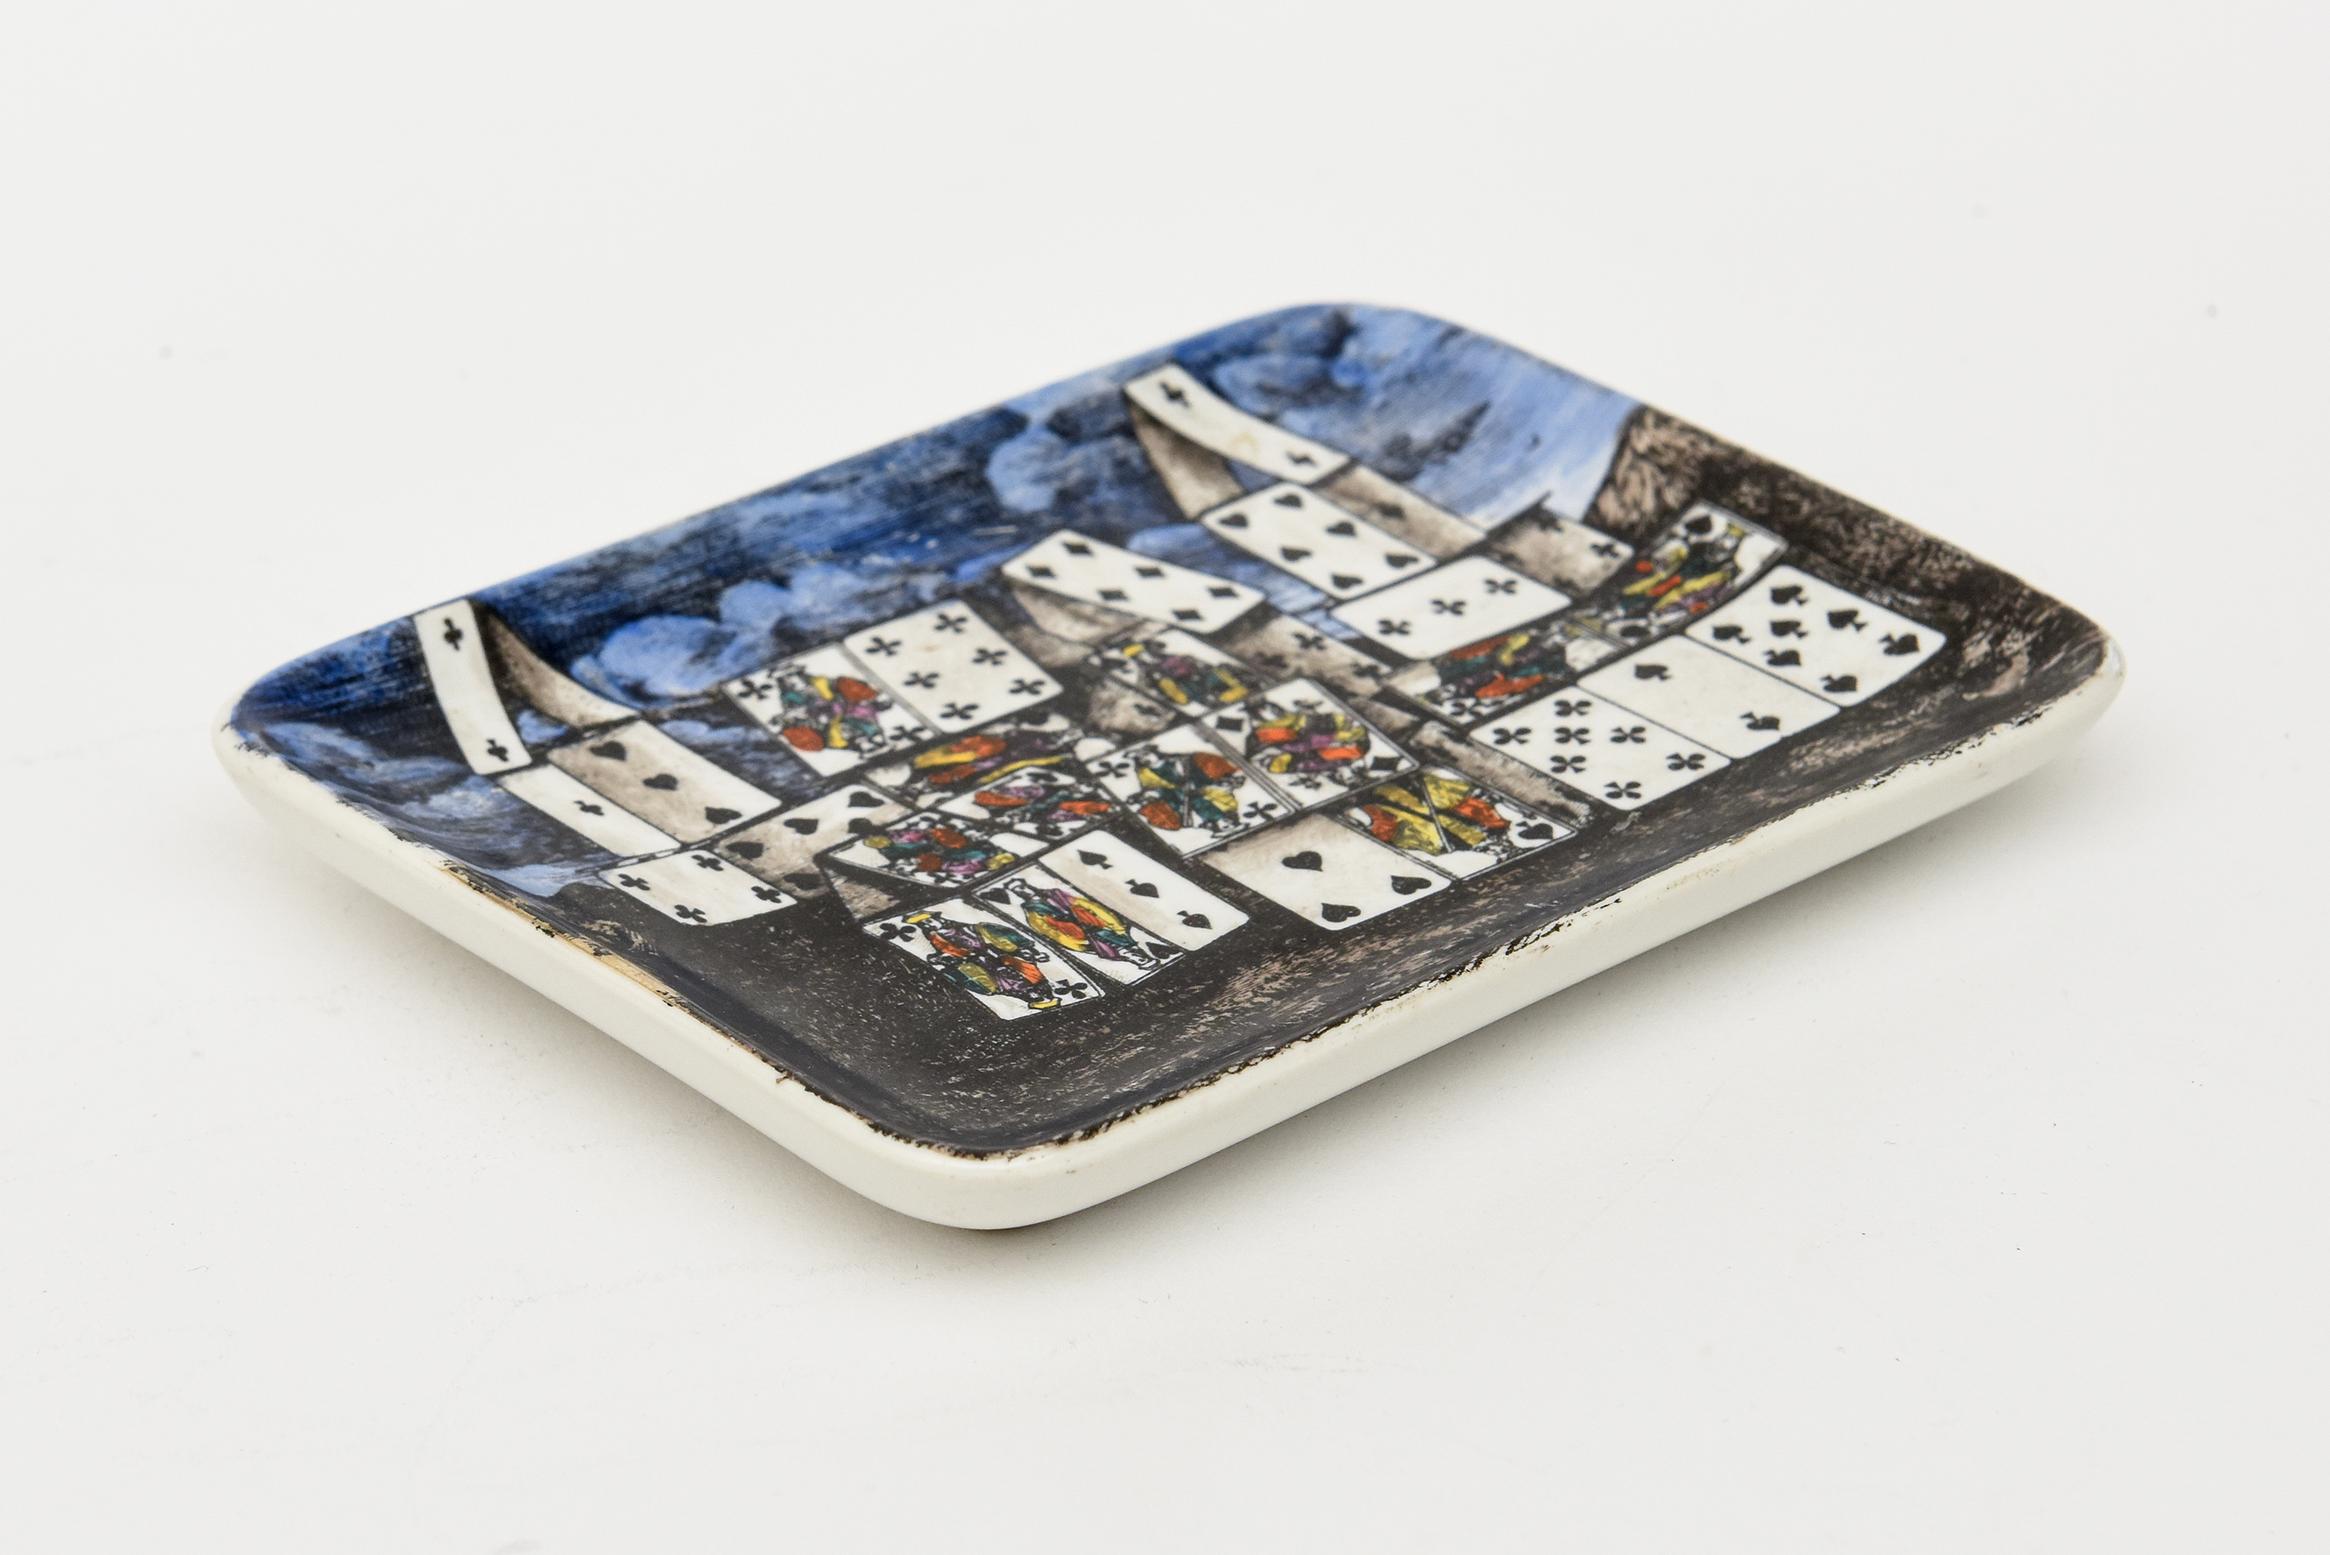 This dream like hallmarked Mid-Century Modern original Piero Fornasetti small tray, dish or desk accessory is lithographically hand painted porcelain. It is called the House of Cards and is set against a landscape in a surrealist style.I t is as if